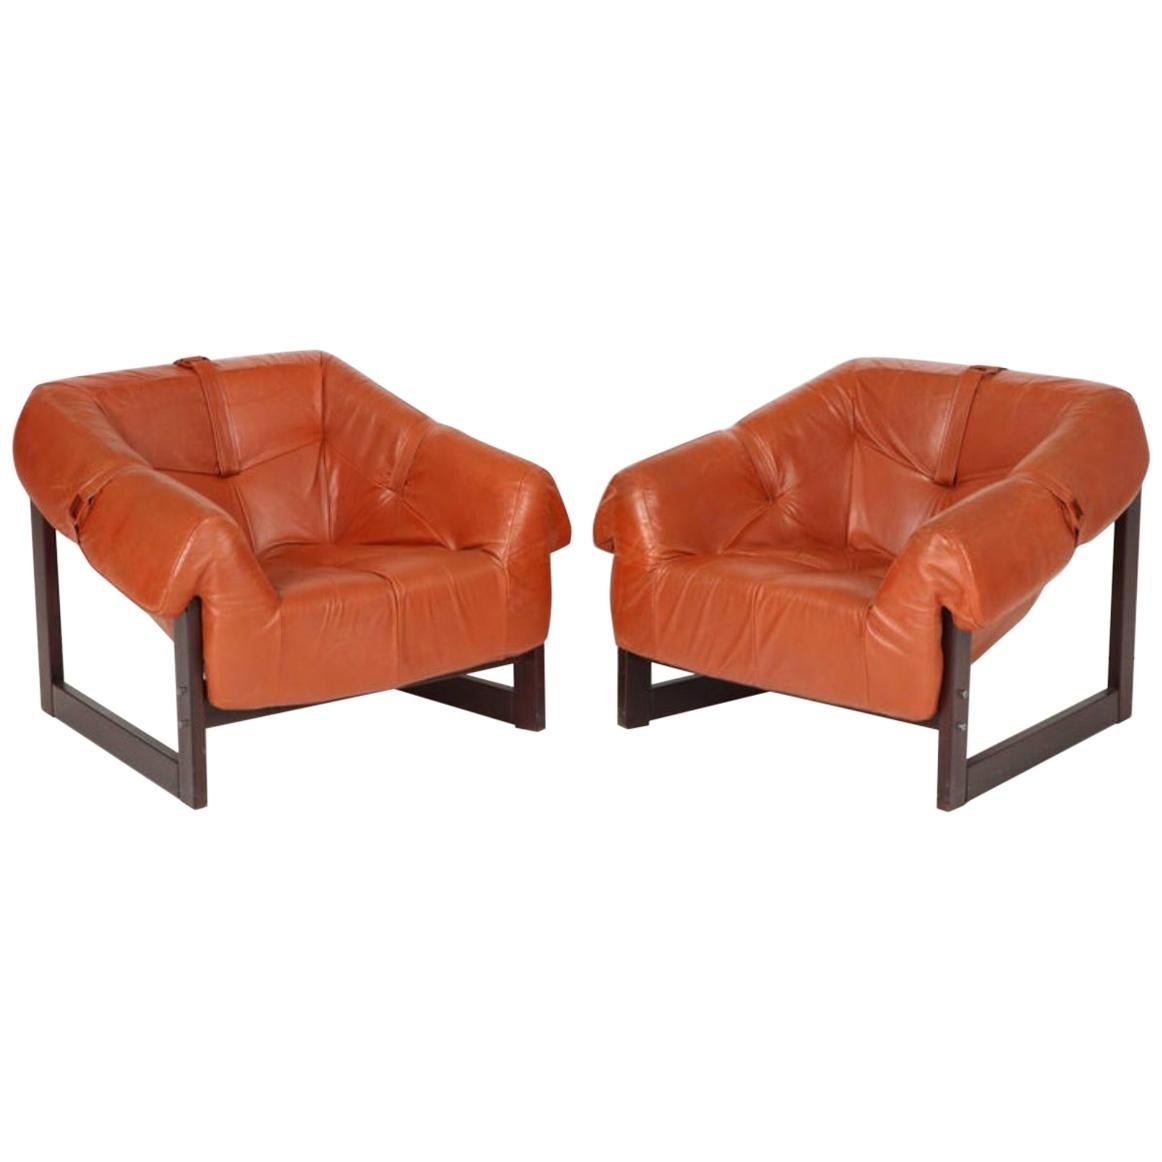 Percival Lafer Lounge Chairs